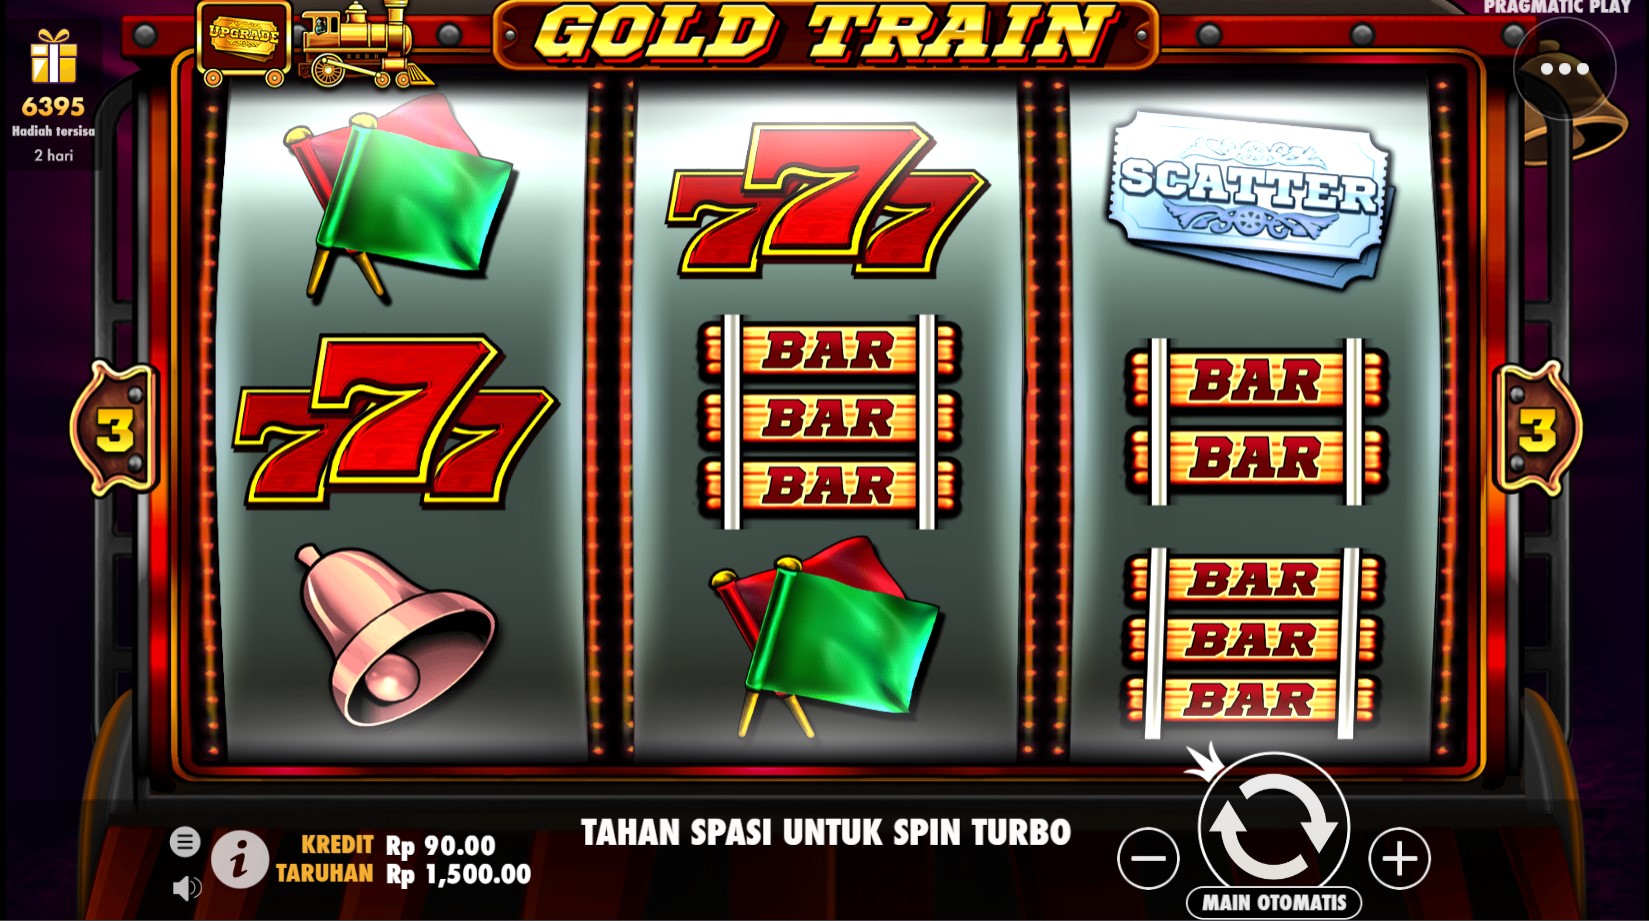 “Ride the Rails to Riches A Journey into the Gold Train Slot Adventure”